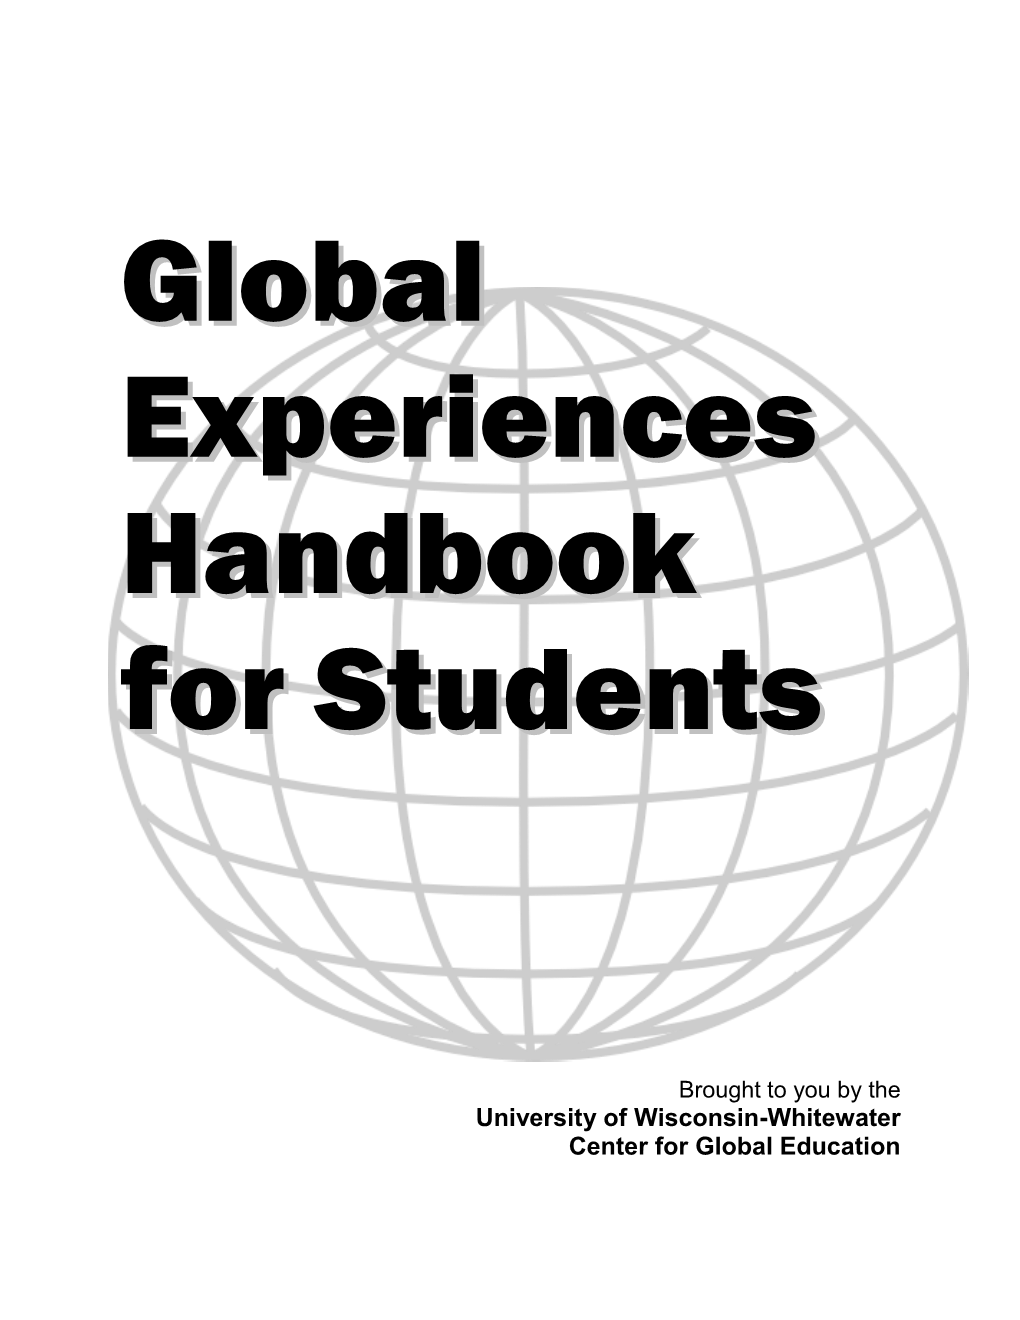 Global Experiences Handbook for Students